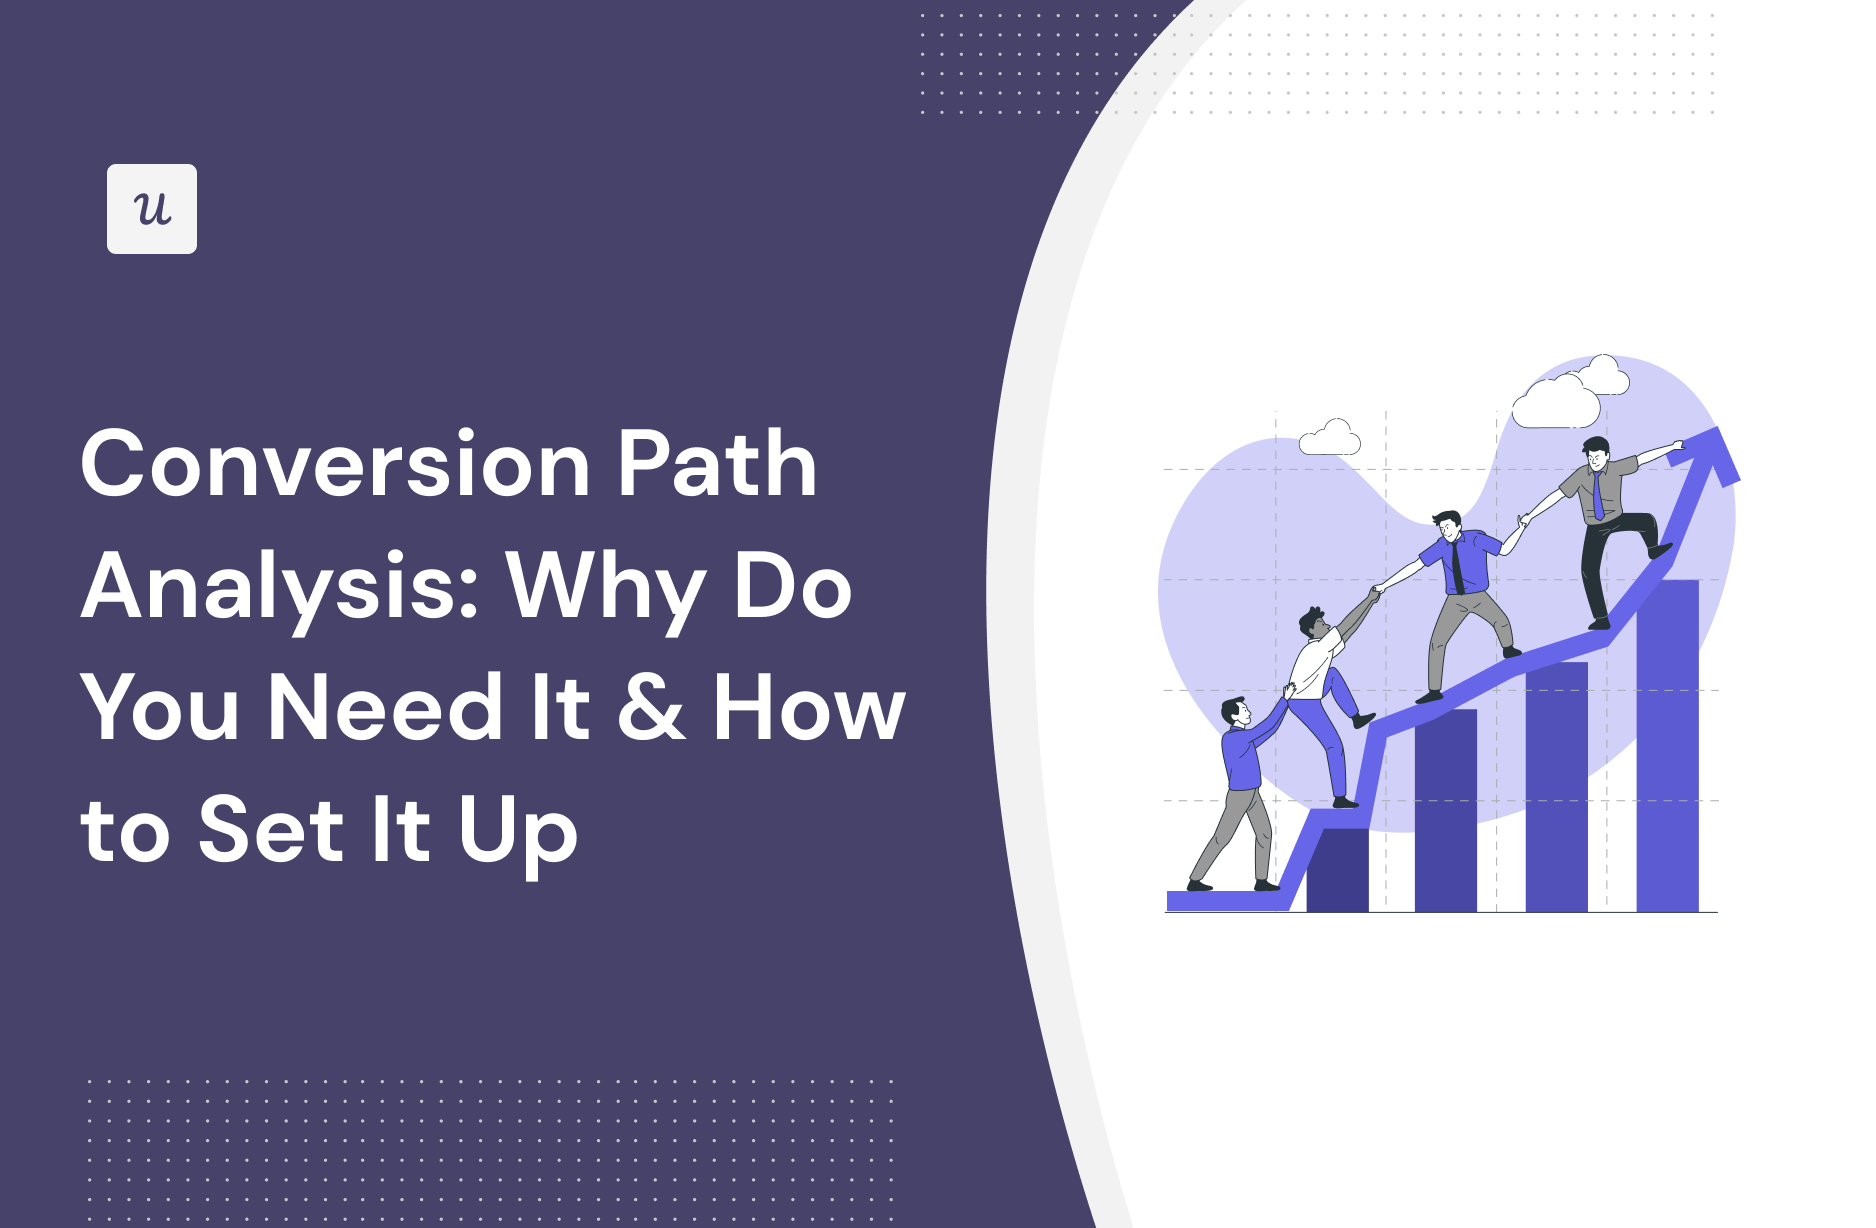 Conversion Path Analysis: Why Do You Need It & How to Set It Up